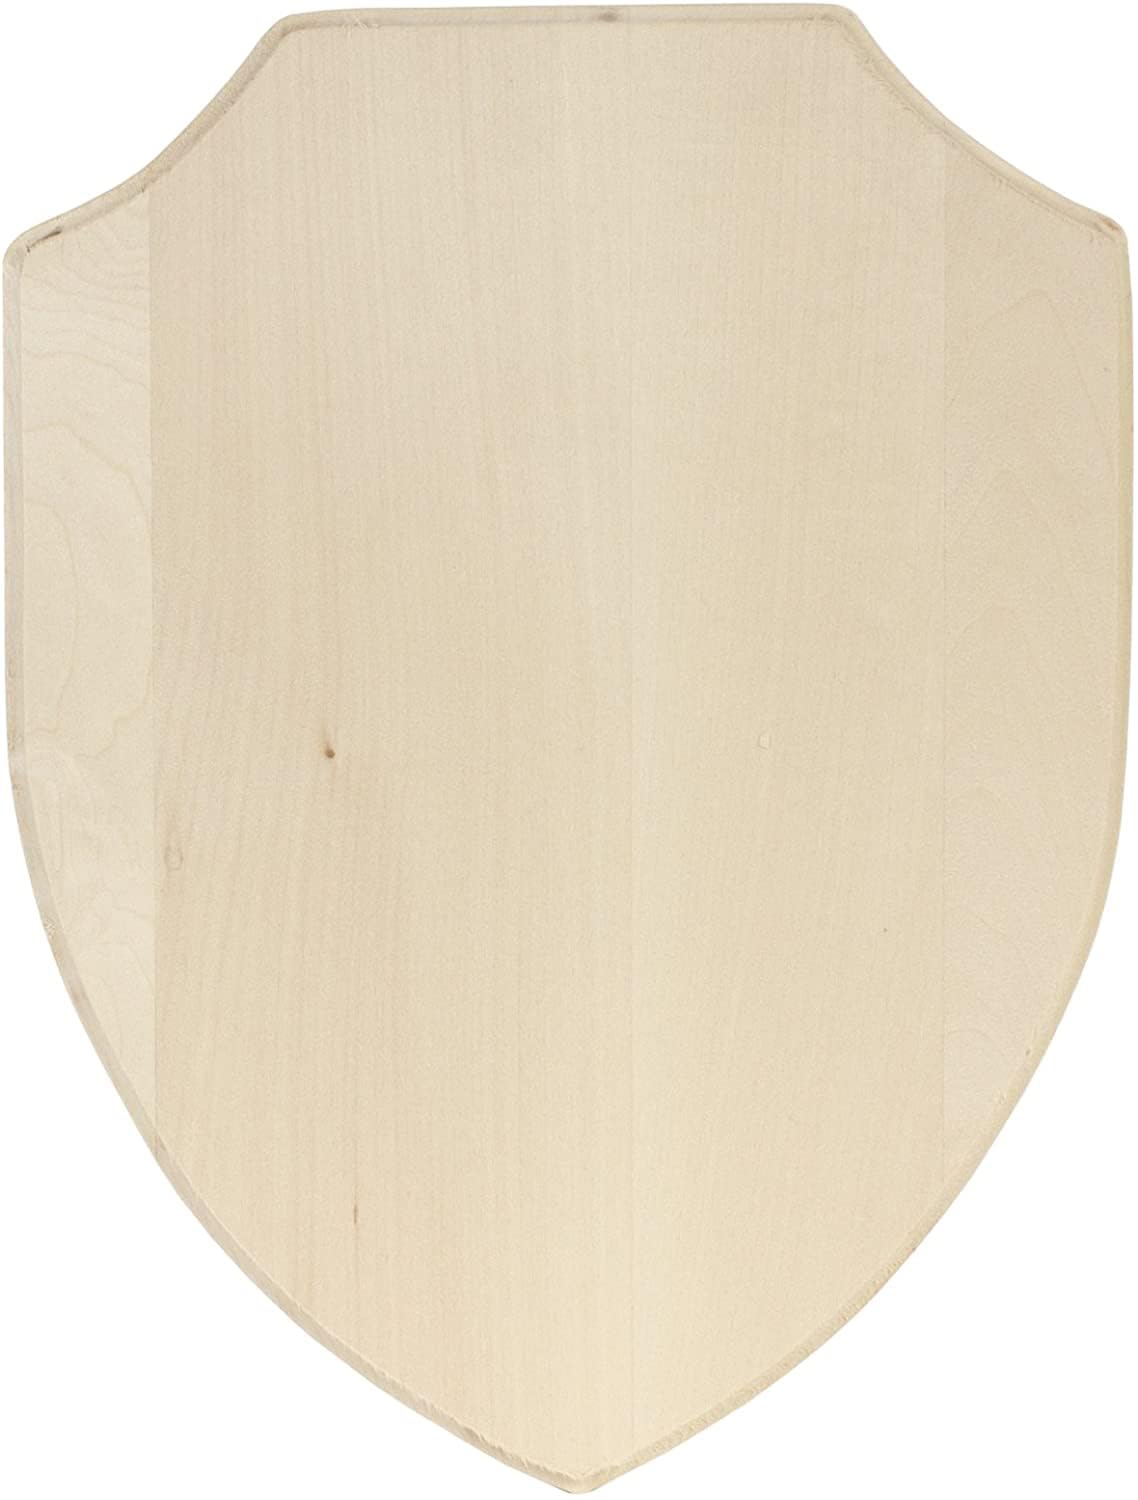 Walnut Hollow 41906 Basswood Simple Shield Plaque, 9 x 12 x 0.75 for Woodburning and Coats of Arms